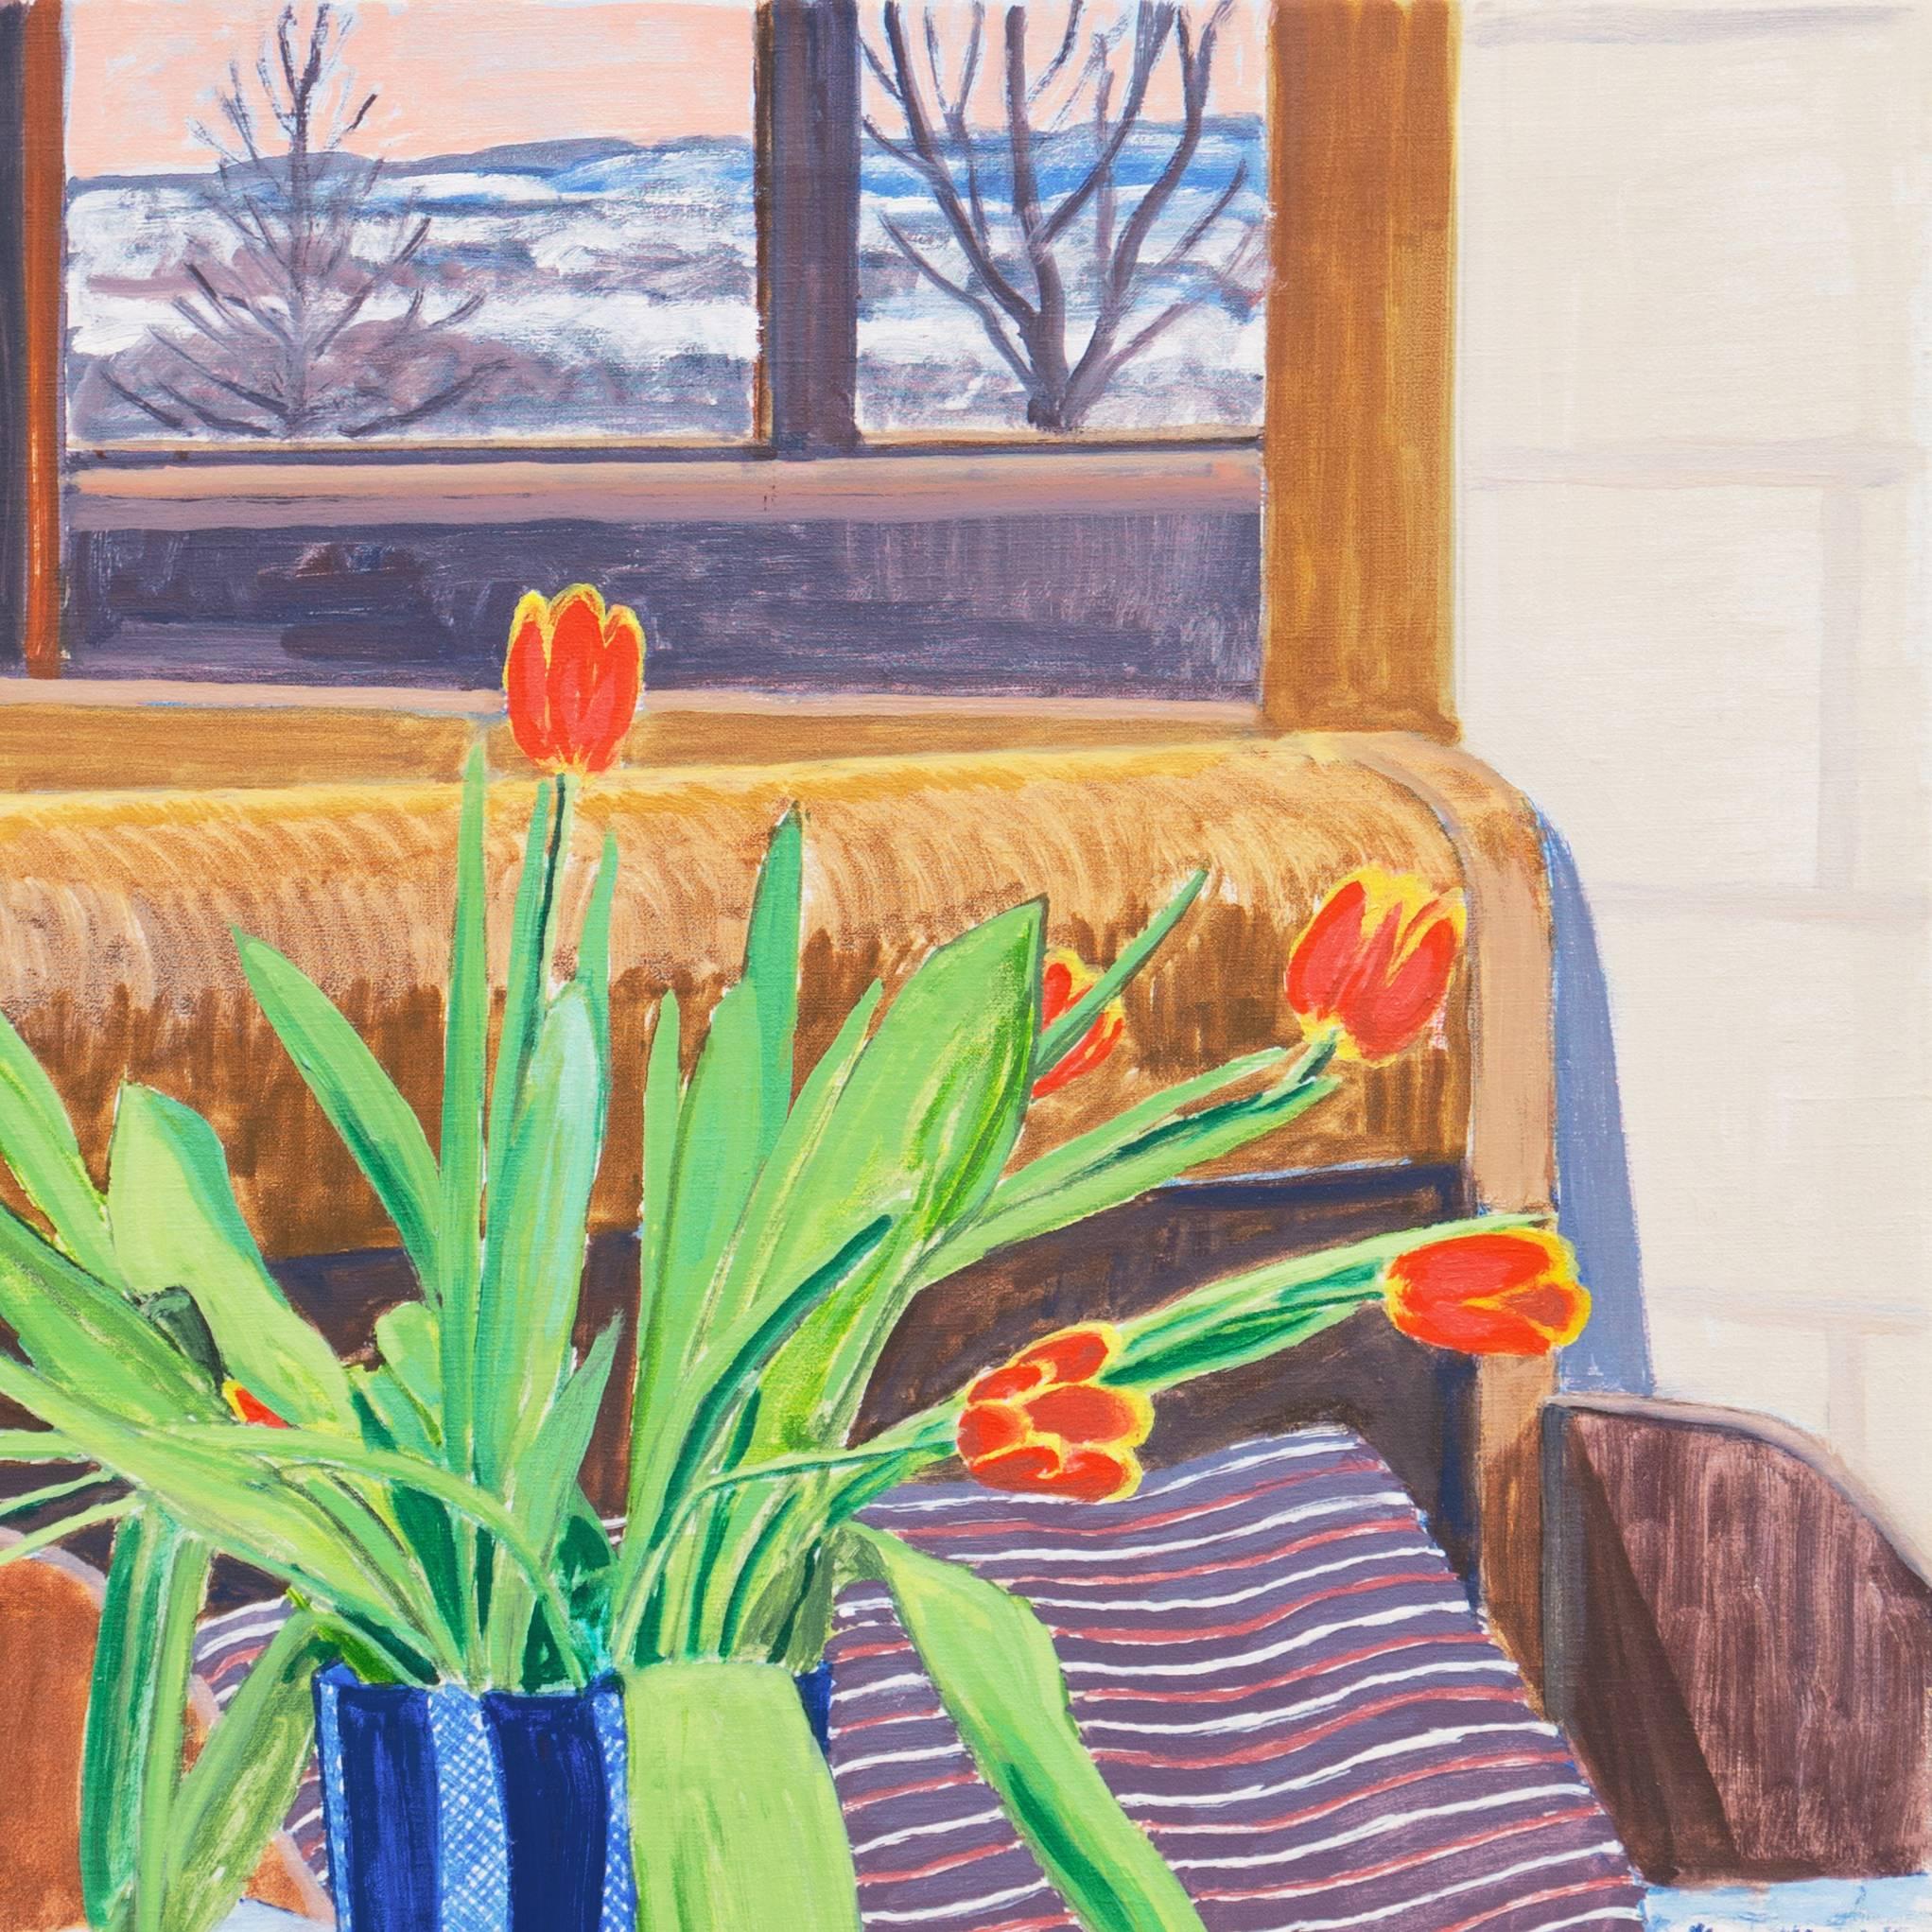 Signed lower right, 'Lars Swane', dated 1986, and inscribed verso 'Tilhører Palle Nielsen'.

A substantial, oil still-life showing variegated, red and yellow tulips informally arranged in a cobalt blue patterned vase, resting inside a cobalt and